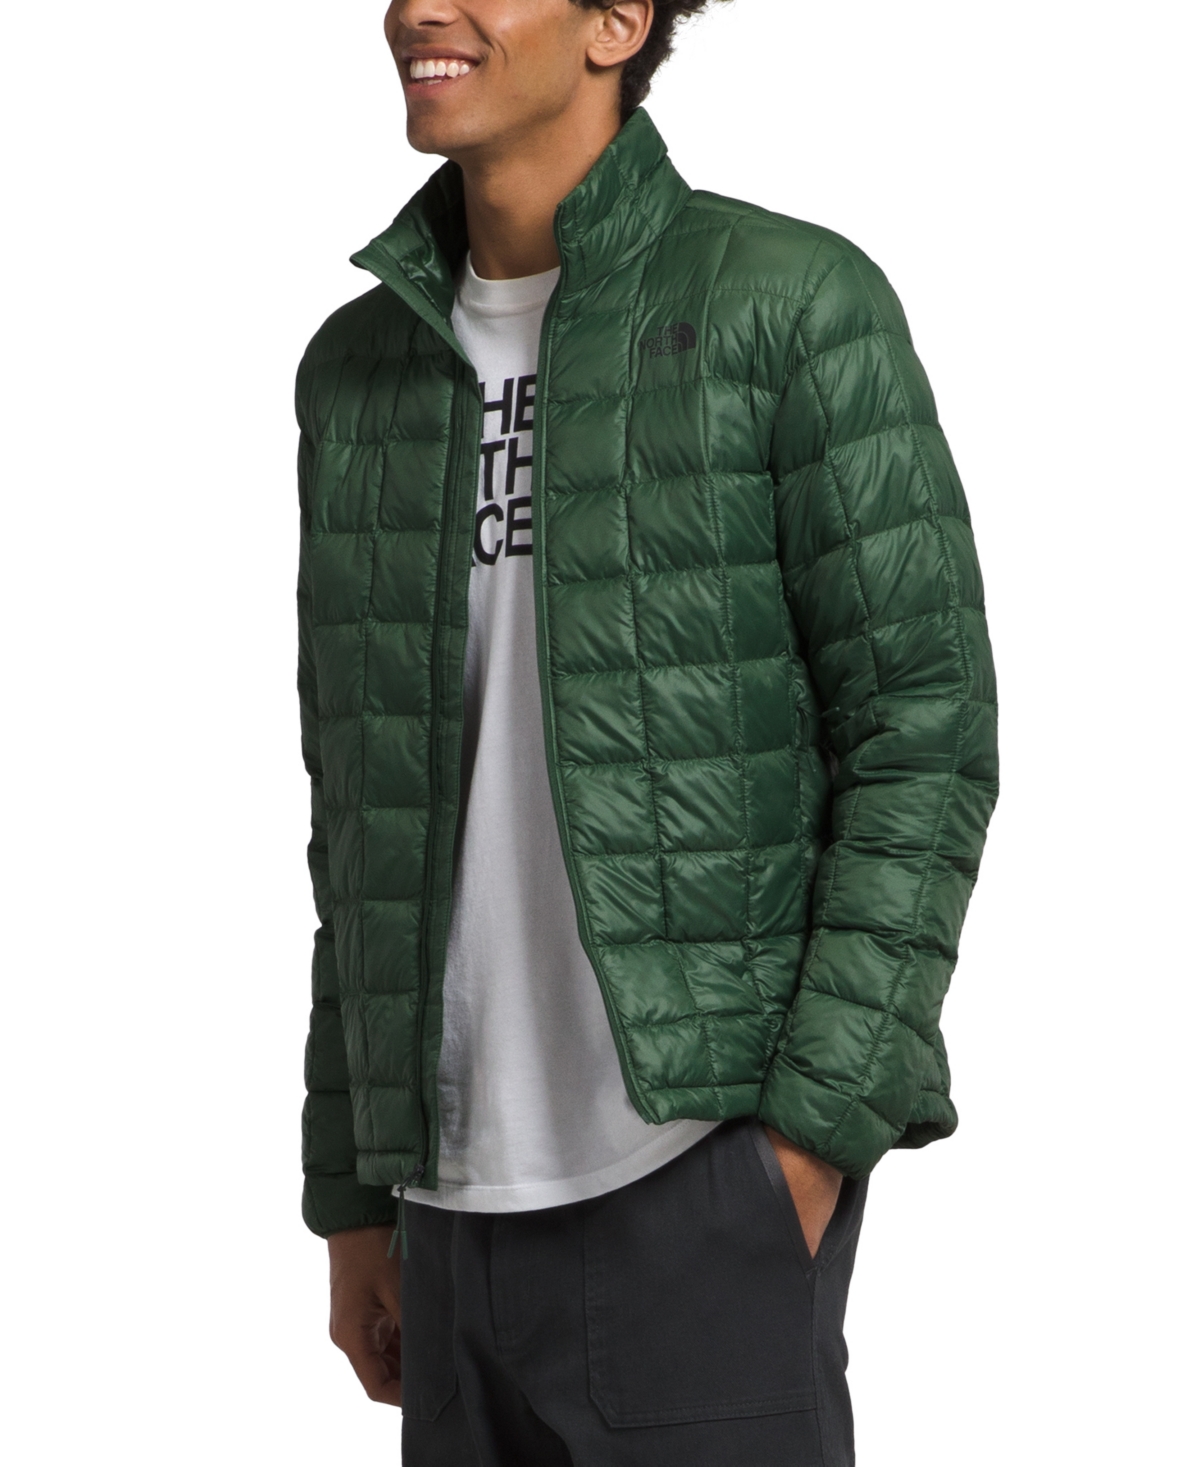 THE NORTH FACE MEN'S THERMOBALL JACKET 2.0